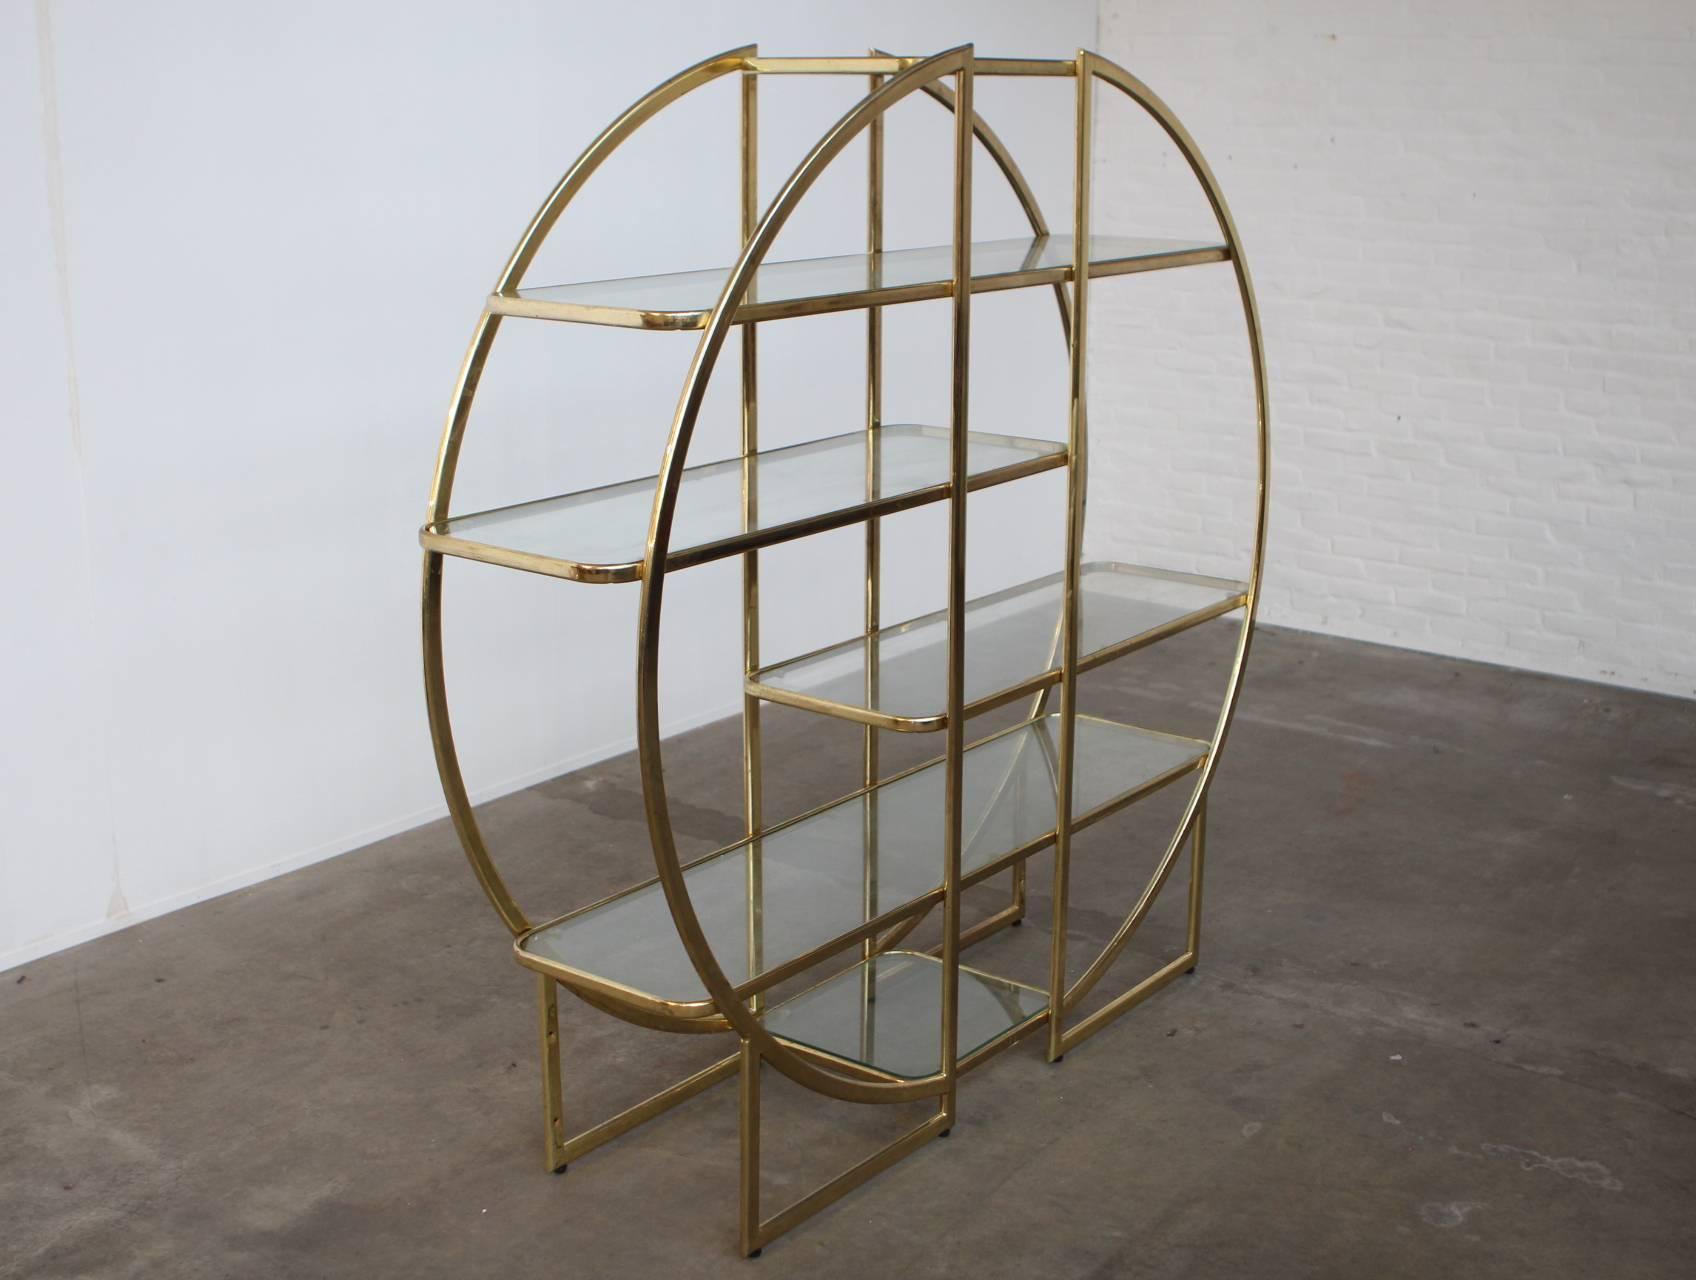 Wonderful chic round étagère, room divider, vitrine or book case in the manner of Milo Baughman with six variously sized glass shelves. This piece can be put against the wall but is also great to use as room divider. Amazing eye-catching piece and a